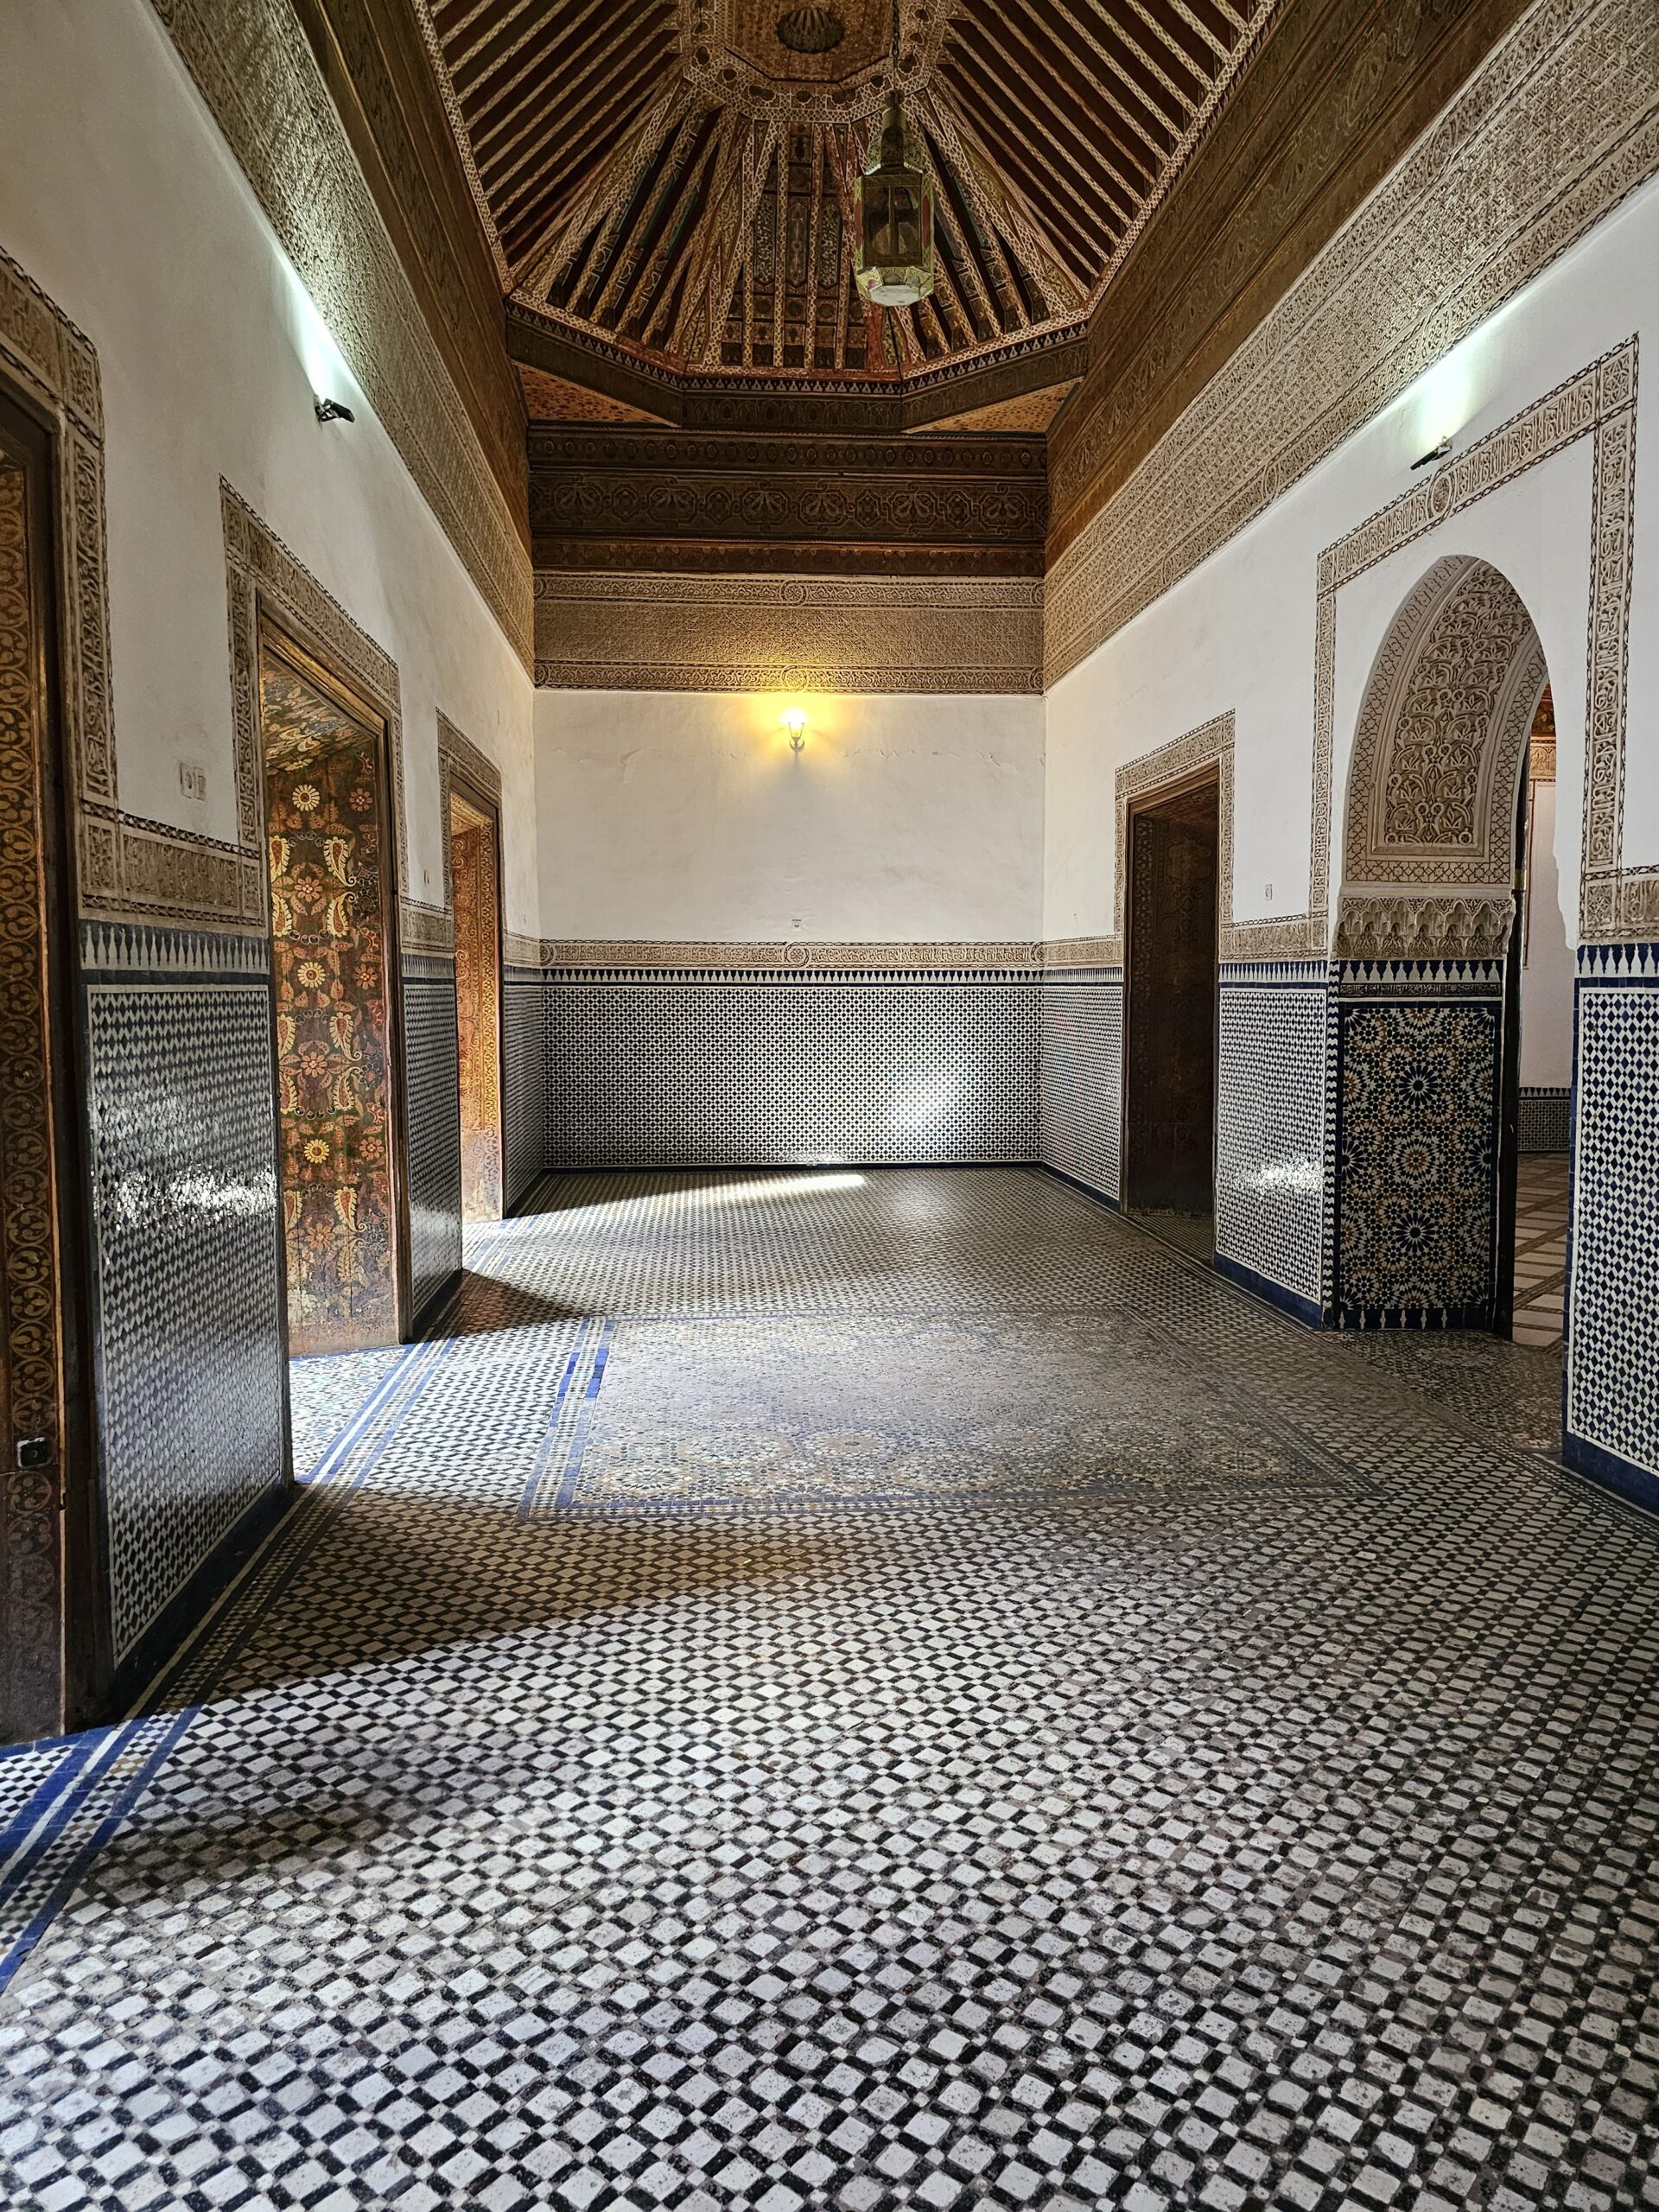 A corridor at Bahia Palace, Marrakesh. The floor is colourfully tiled. Image by 360onhistory.com